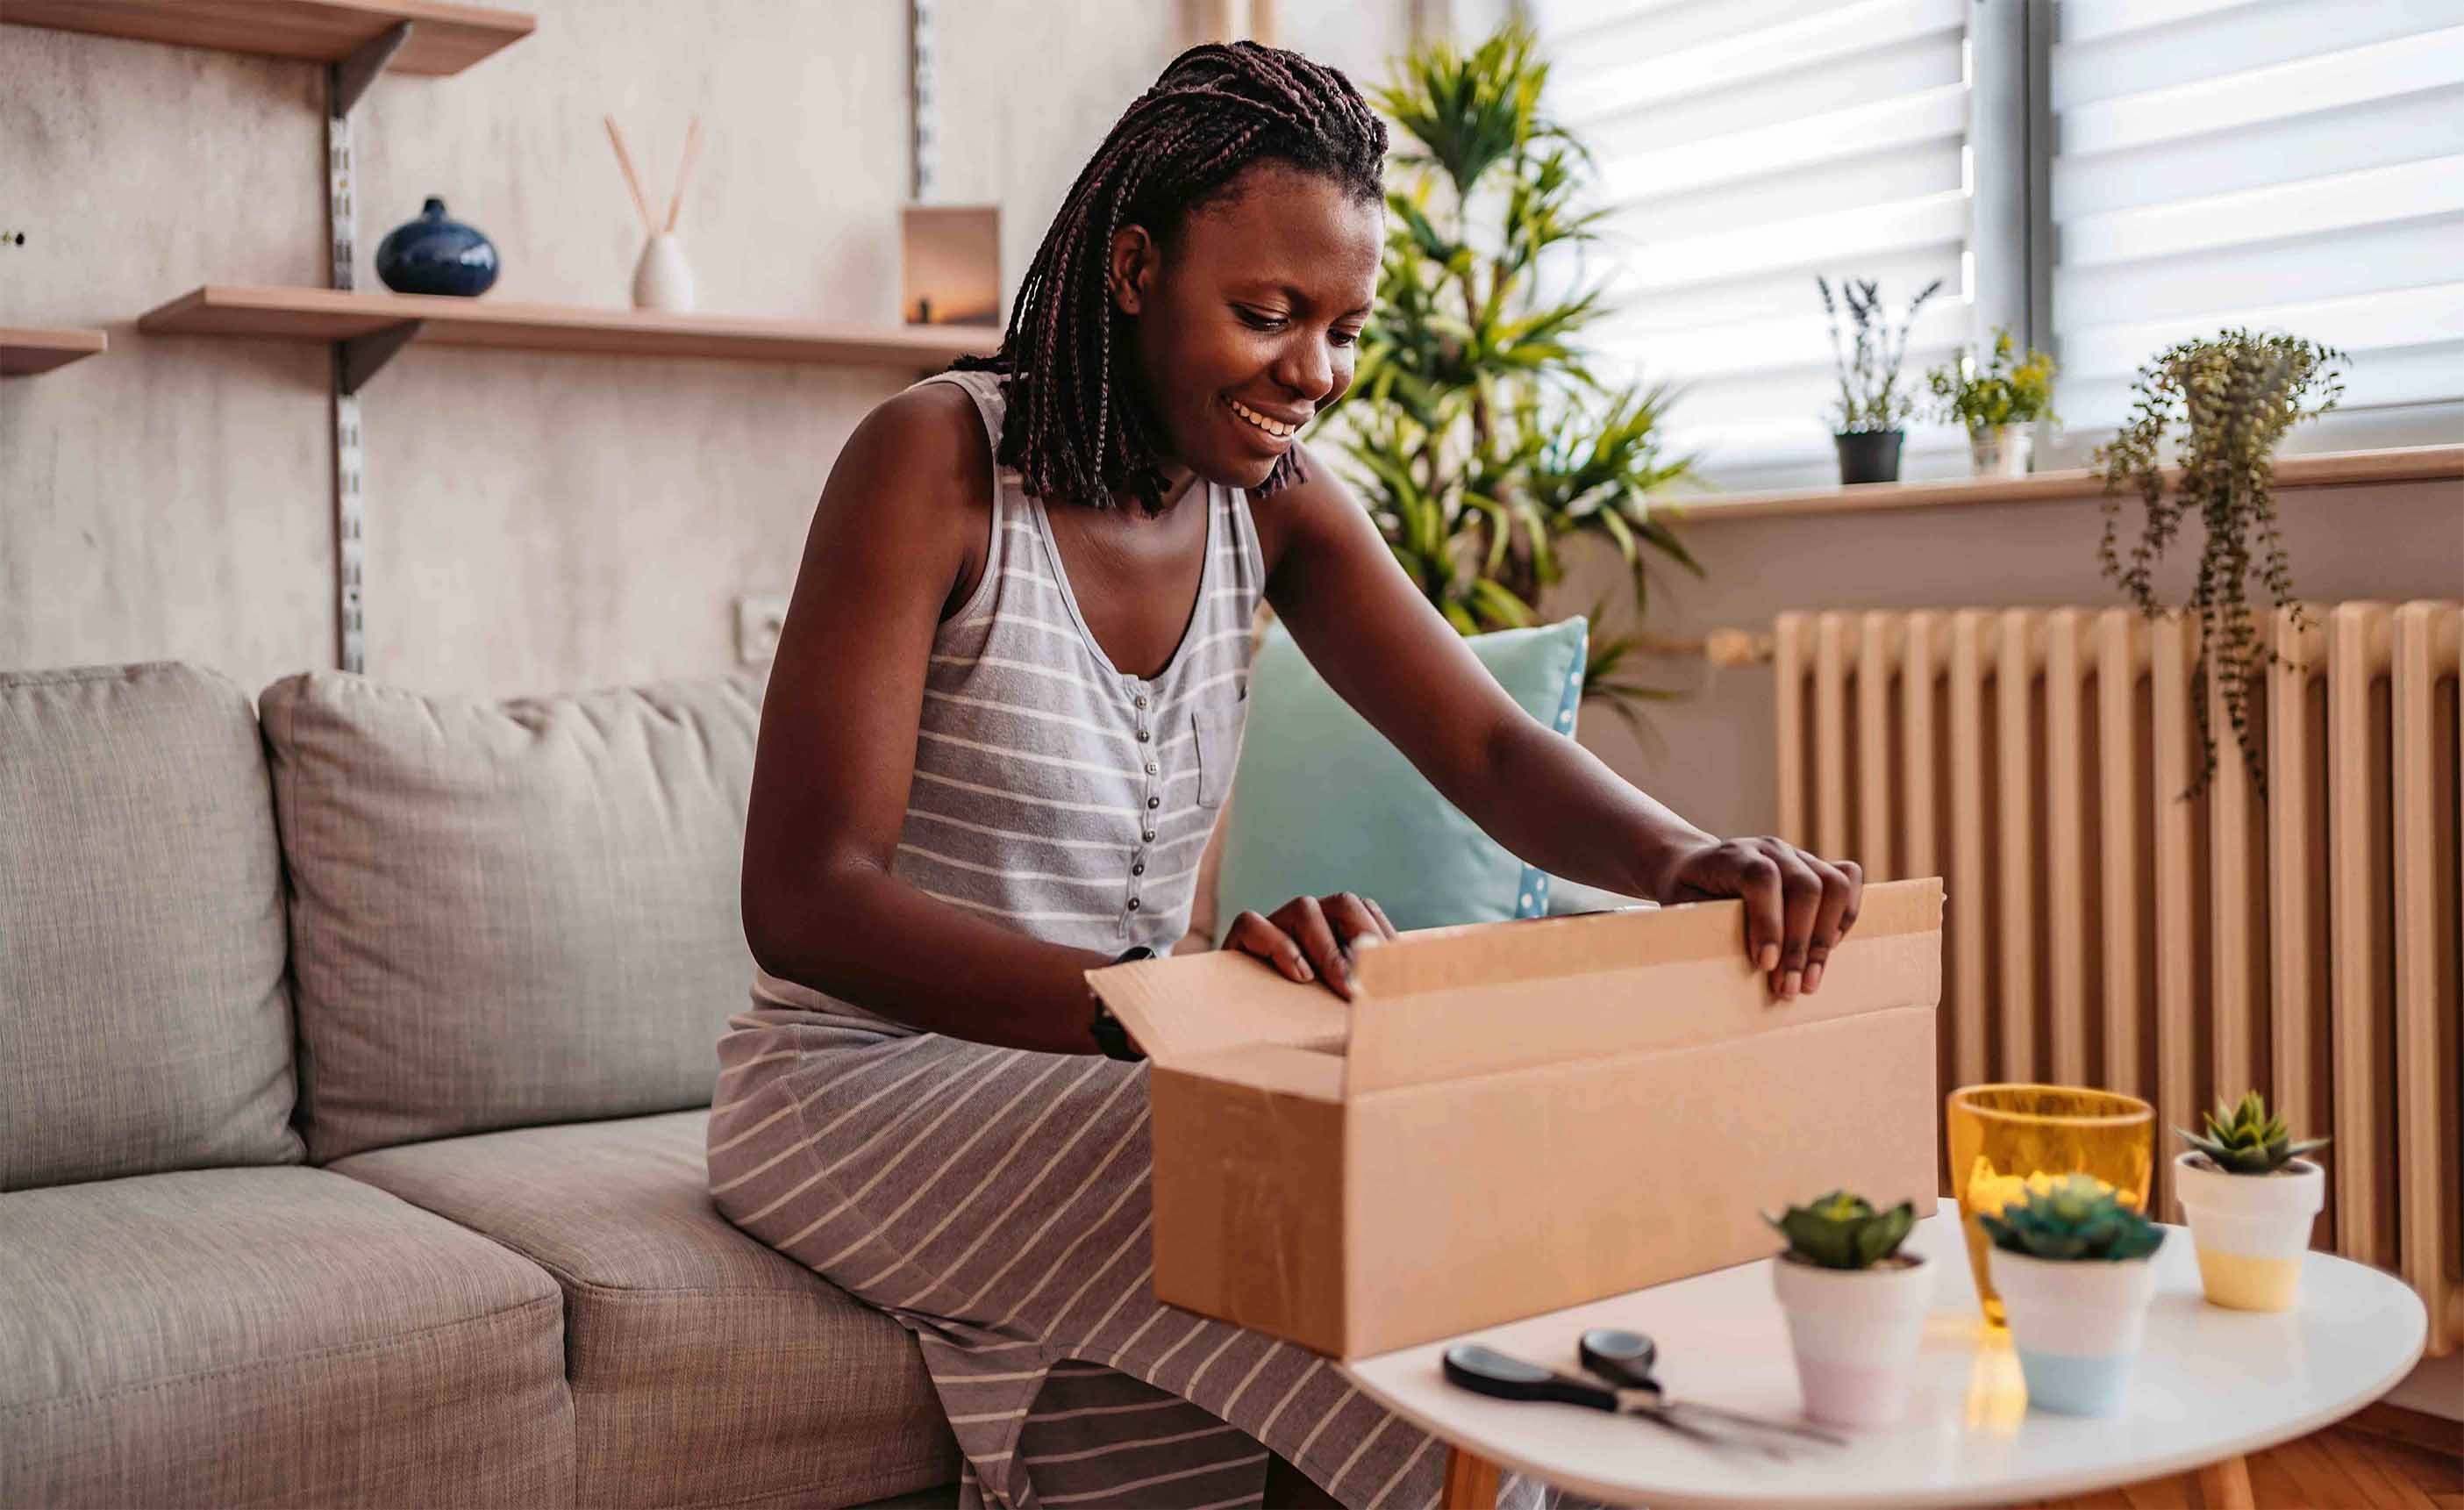 Picture of a woman unpacking a box.